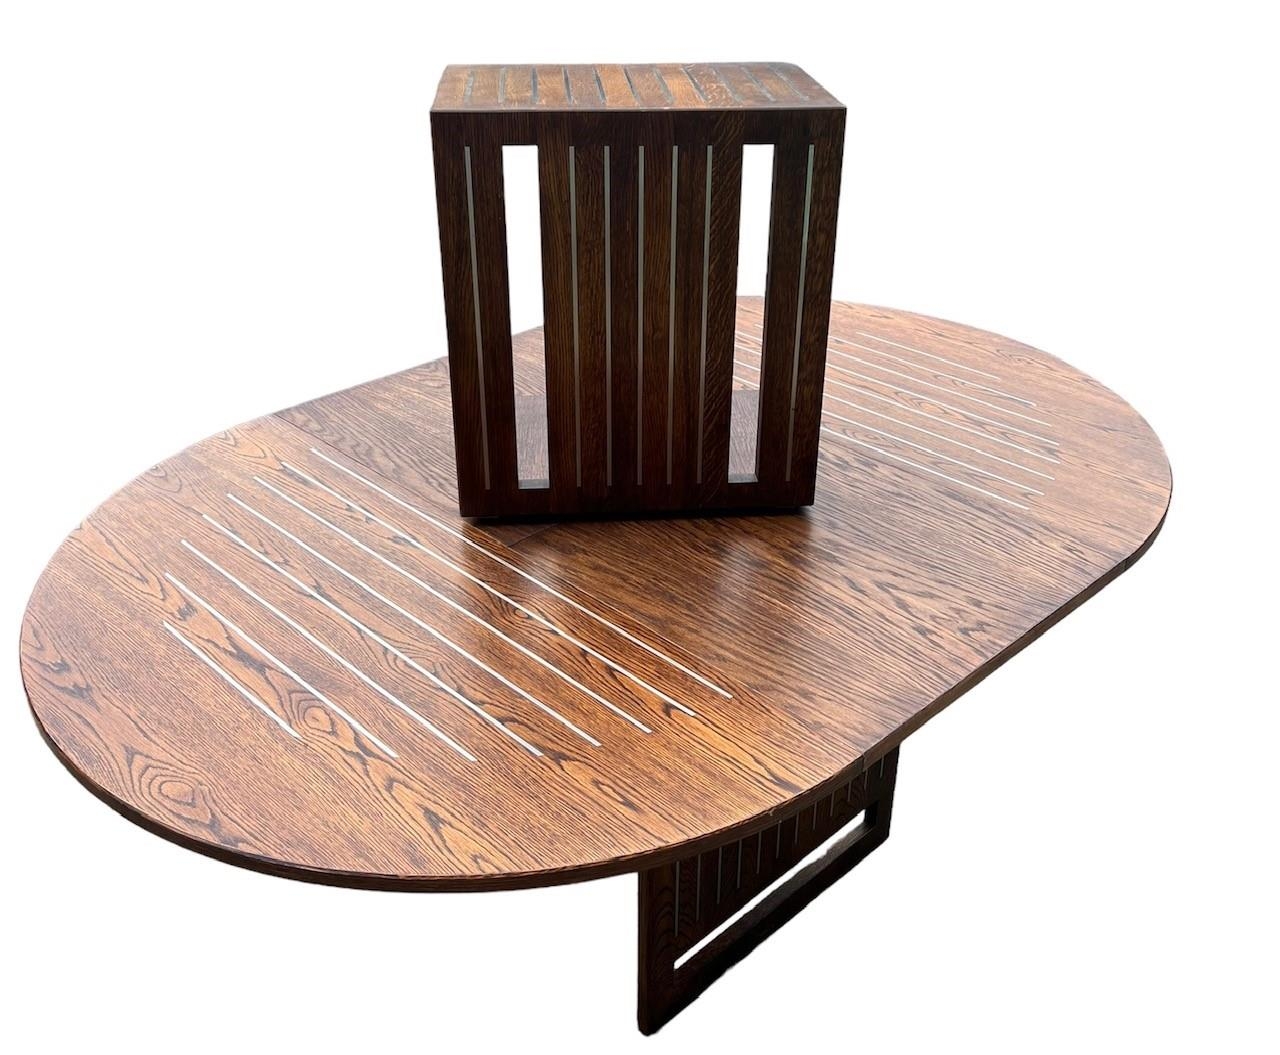 A CONTEMPORARY OAK AND STEEL INLAY DRAW LEAF DINING TABLE With single leaf, together with a matching - Image 7 of 7